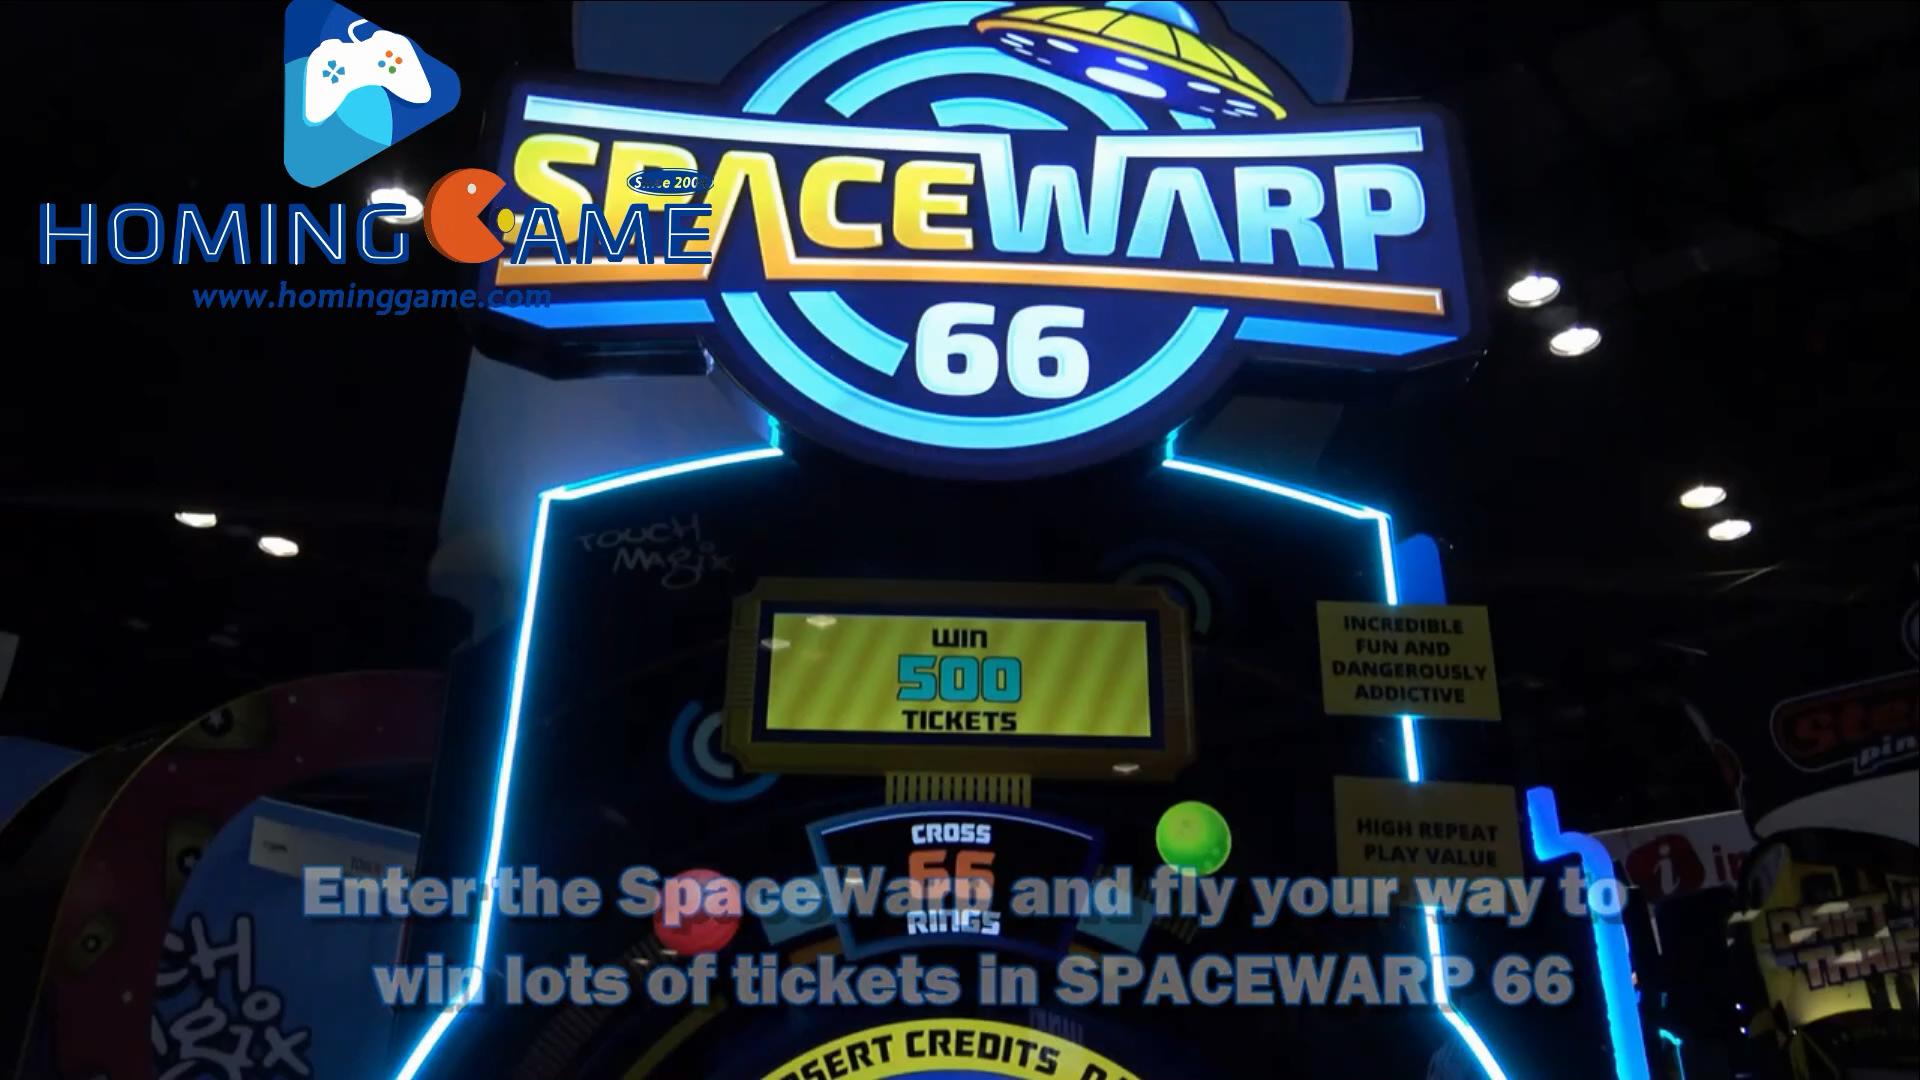 space warp,space warp lottery game machine,space warp game machine,space warp 66 turning lottery arcade game machine,game machine,game machine supplier,game machine factory,game machine for sale,arcade game,arcade games,coin operated game machine,lottery game,kids game machine,amusement park game equipment,game equipment,indoor game machine,electrical game machine,family entertainment game machine,entertainment game,kids game equipment,children game machine,fec game machine,FEC GAME,sports game machine,sport game,hominggame,www.gametube.hk,electrical game,coin games,video game machine,simulator game machin,games,arcade,hominggame game machine